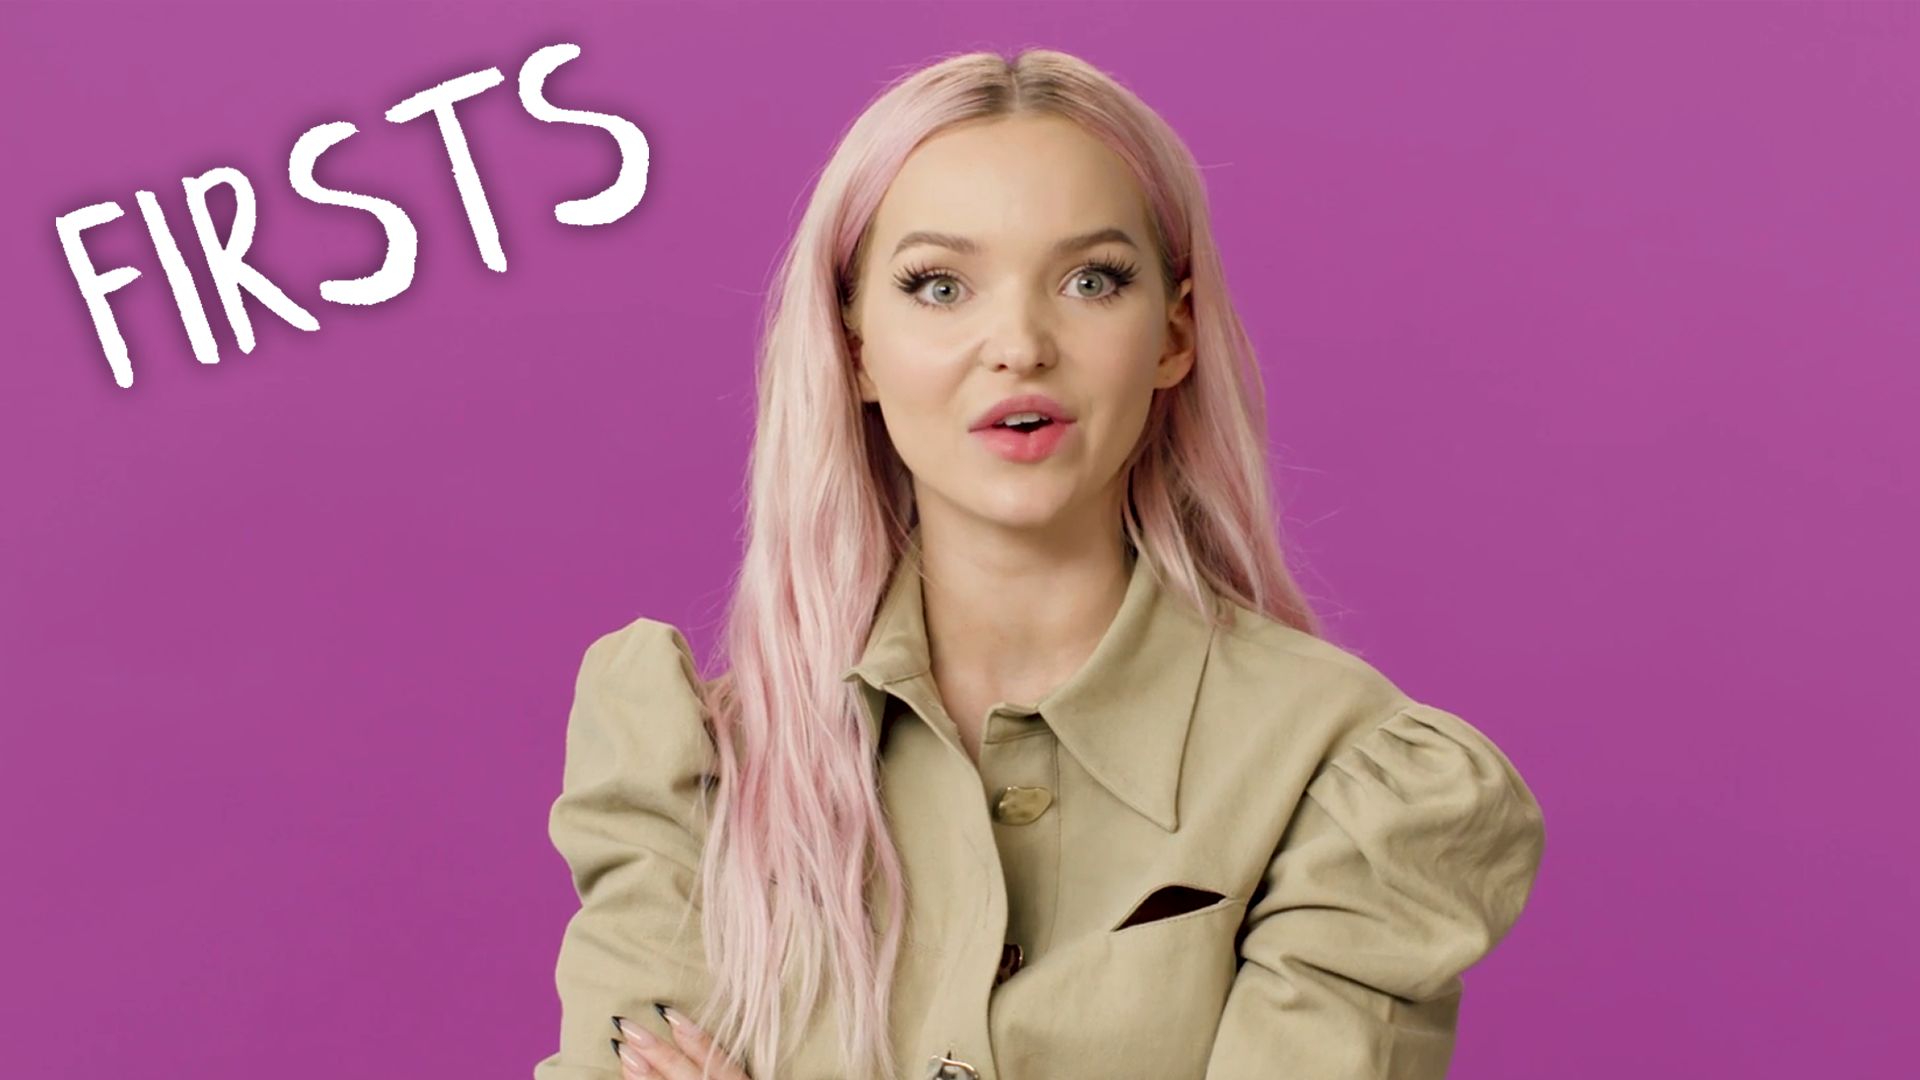 Watch Tattoos, Rock Climbing, and Red Carpets: 24 Hours with Dove